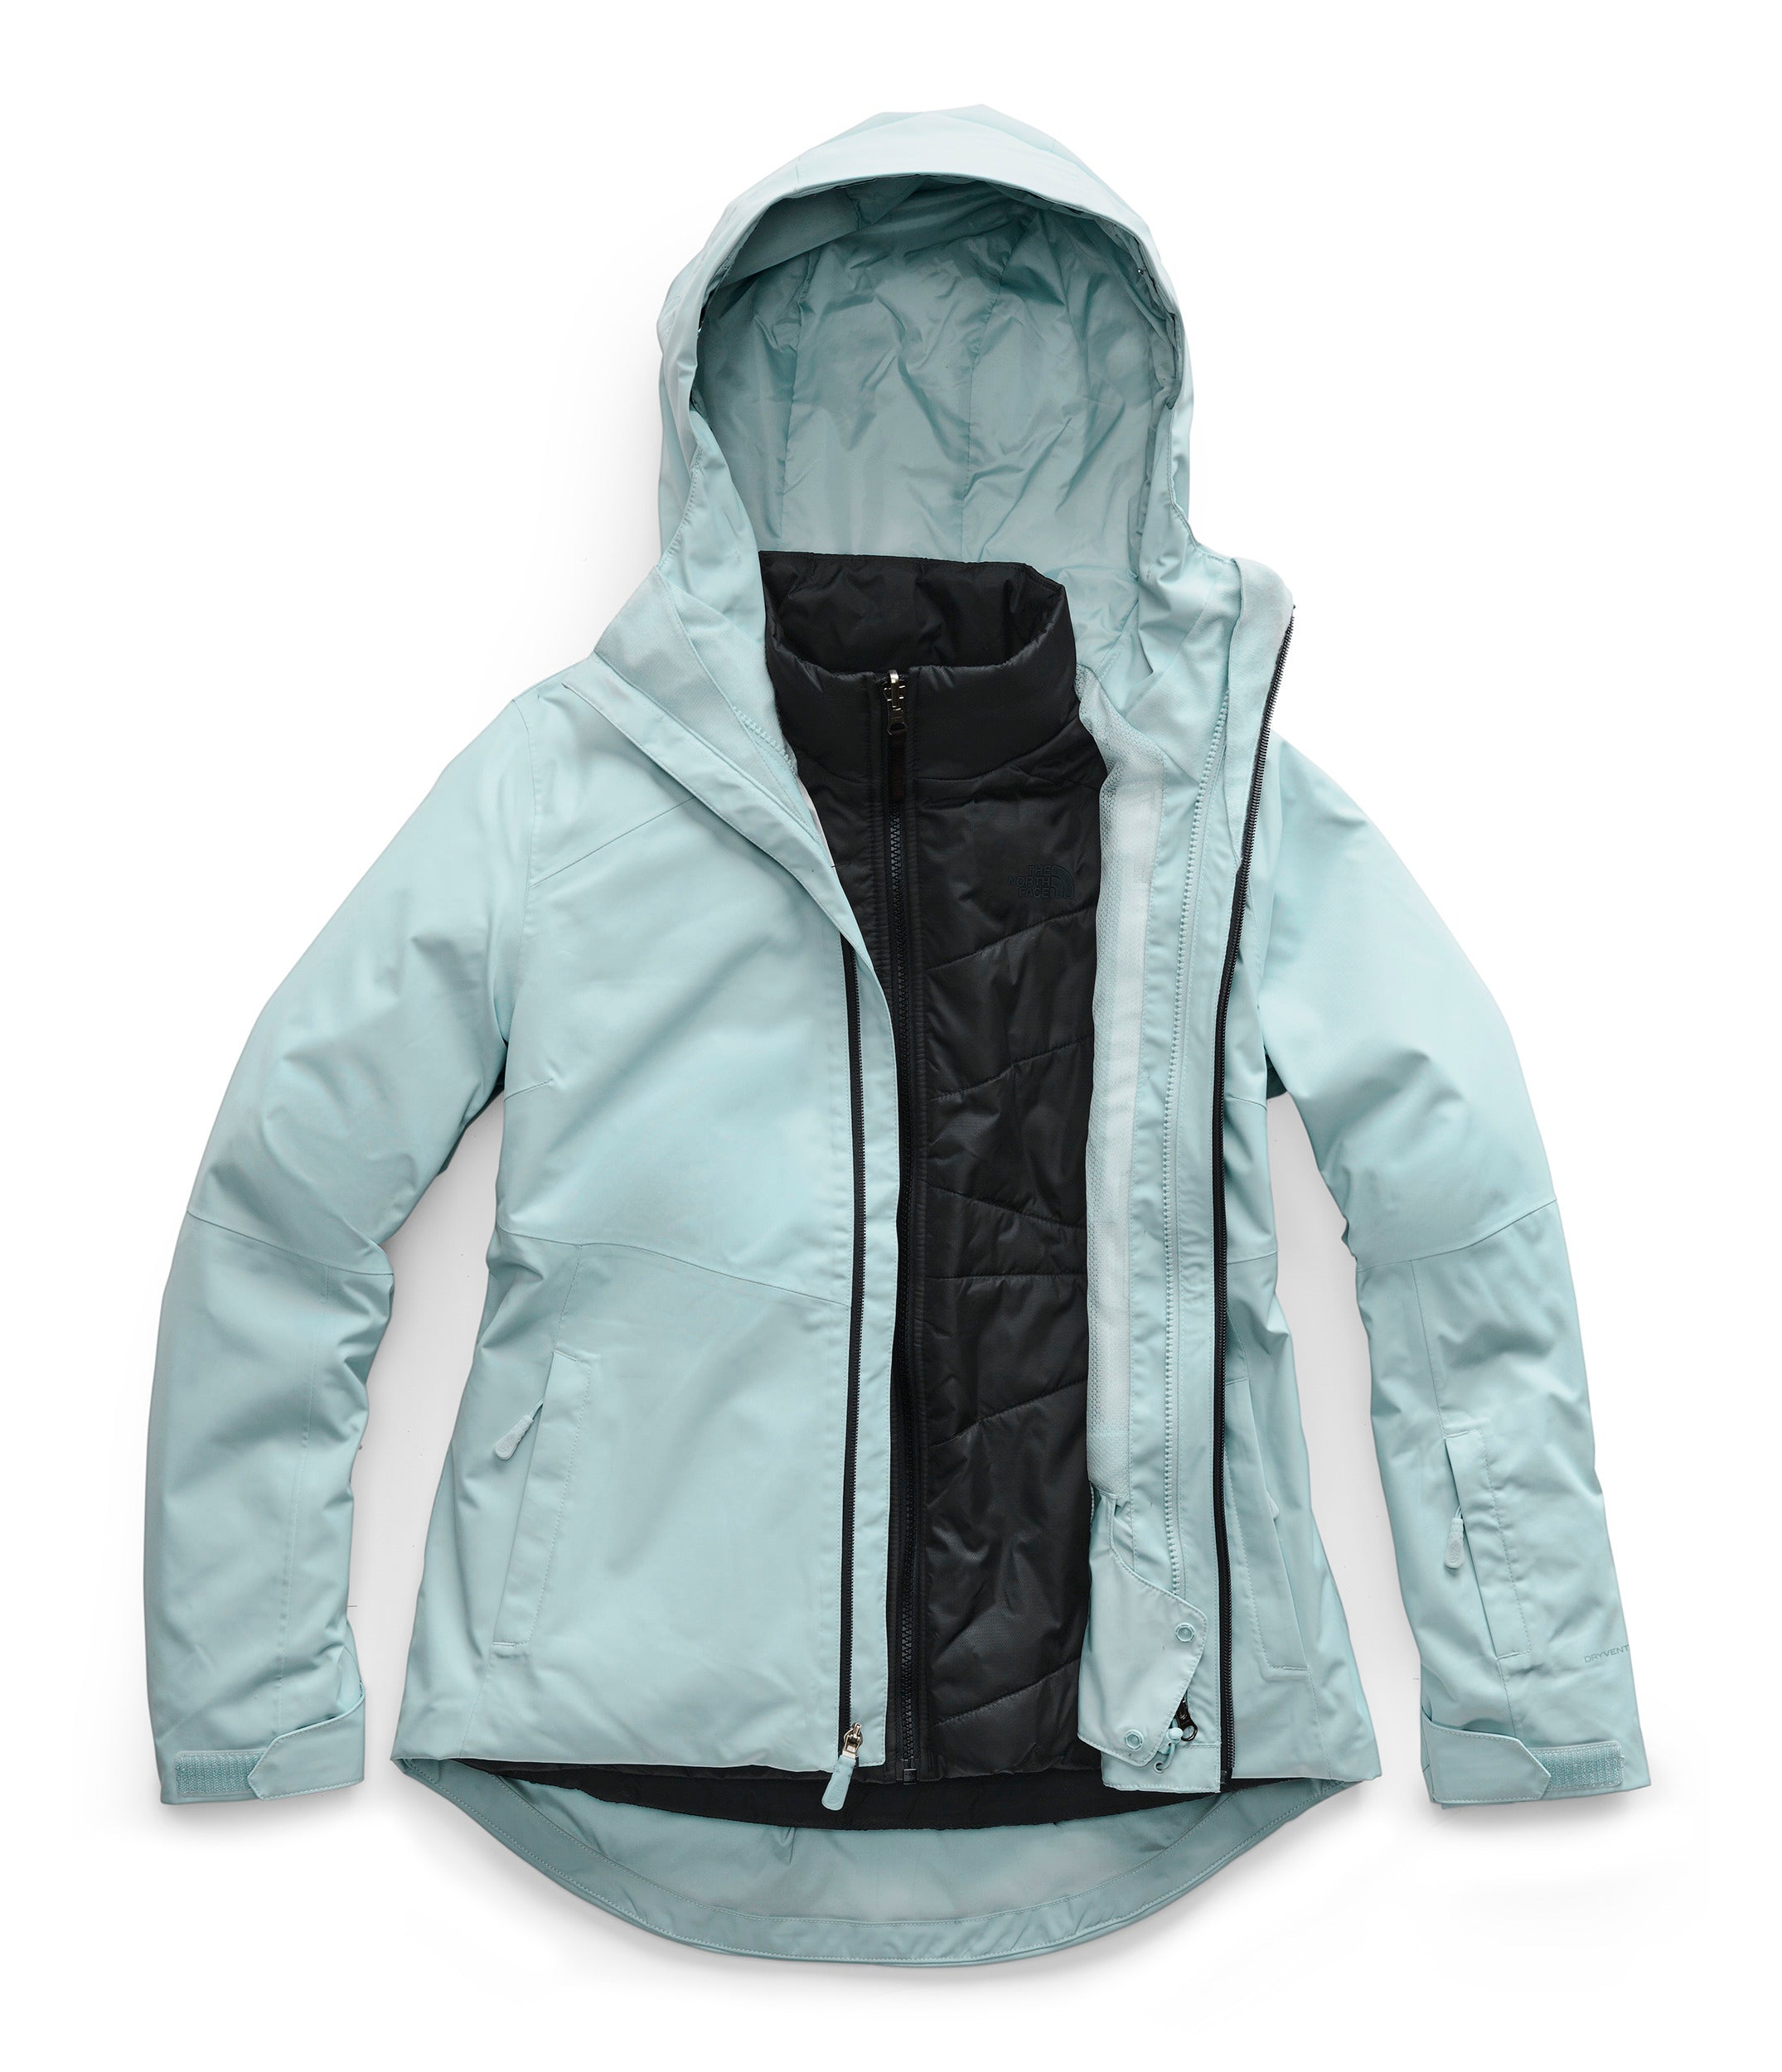 north face merriwood triclimate